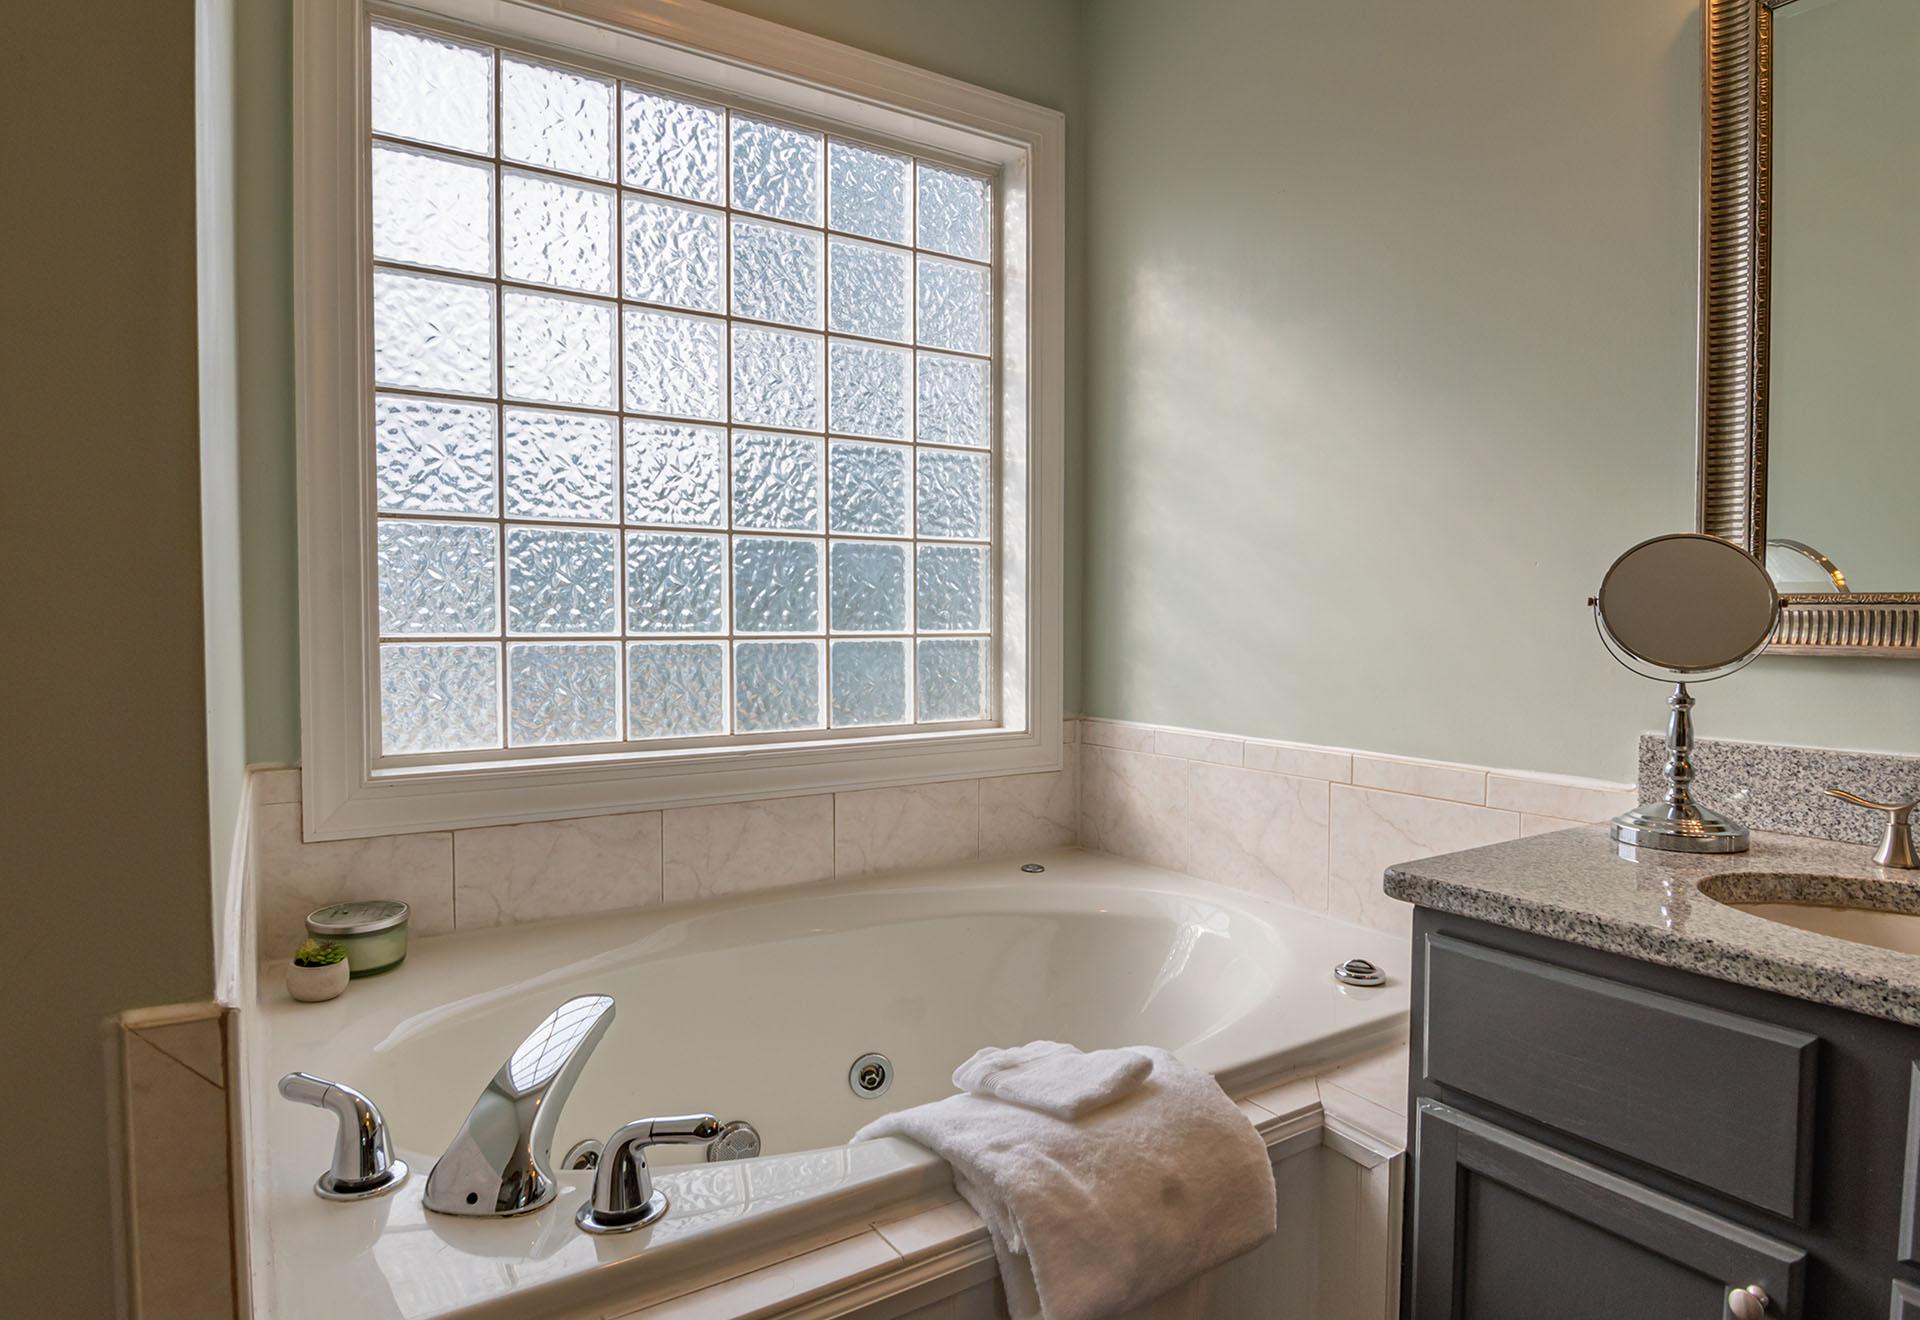 Should You Refinish Reglaze Or, What Is The Difference Between Bathtub Refinishing And Reglazing